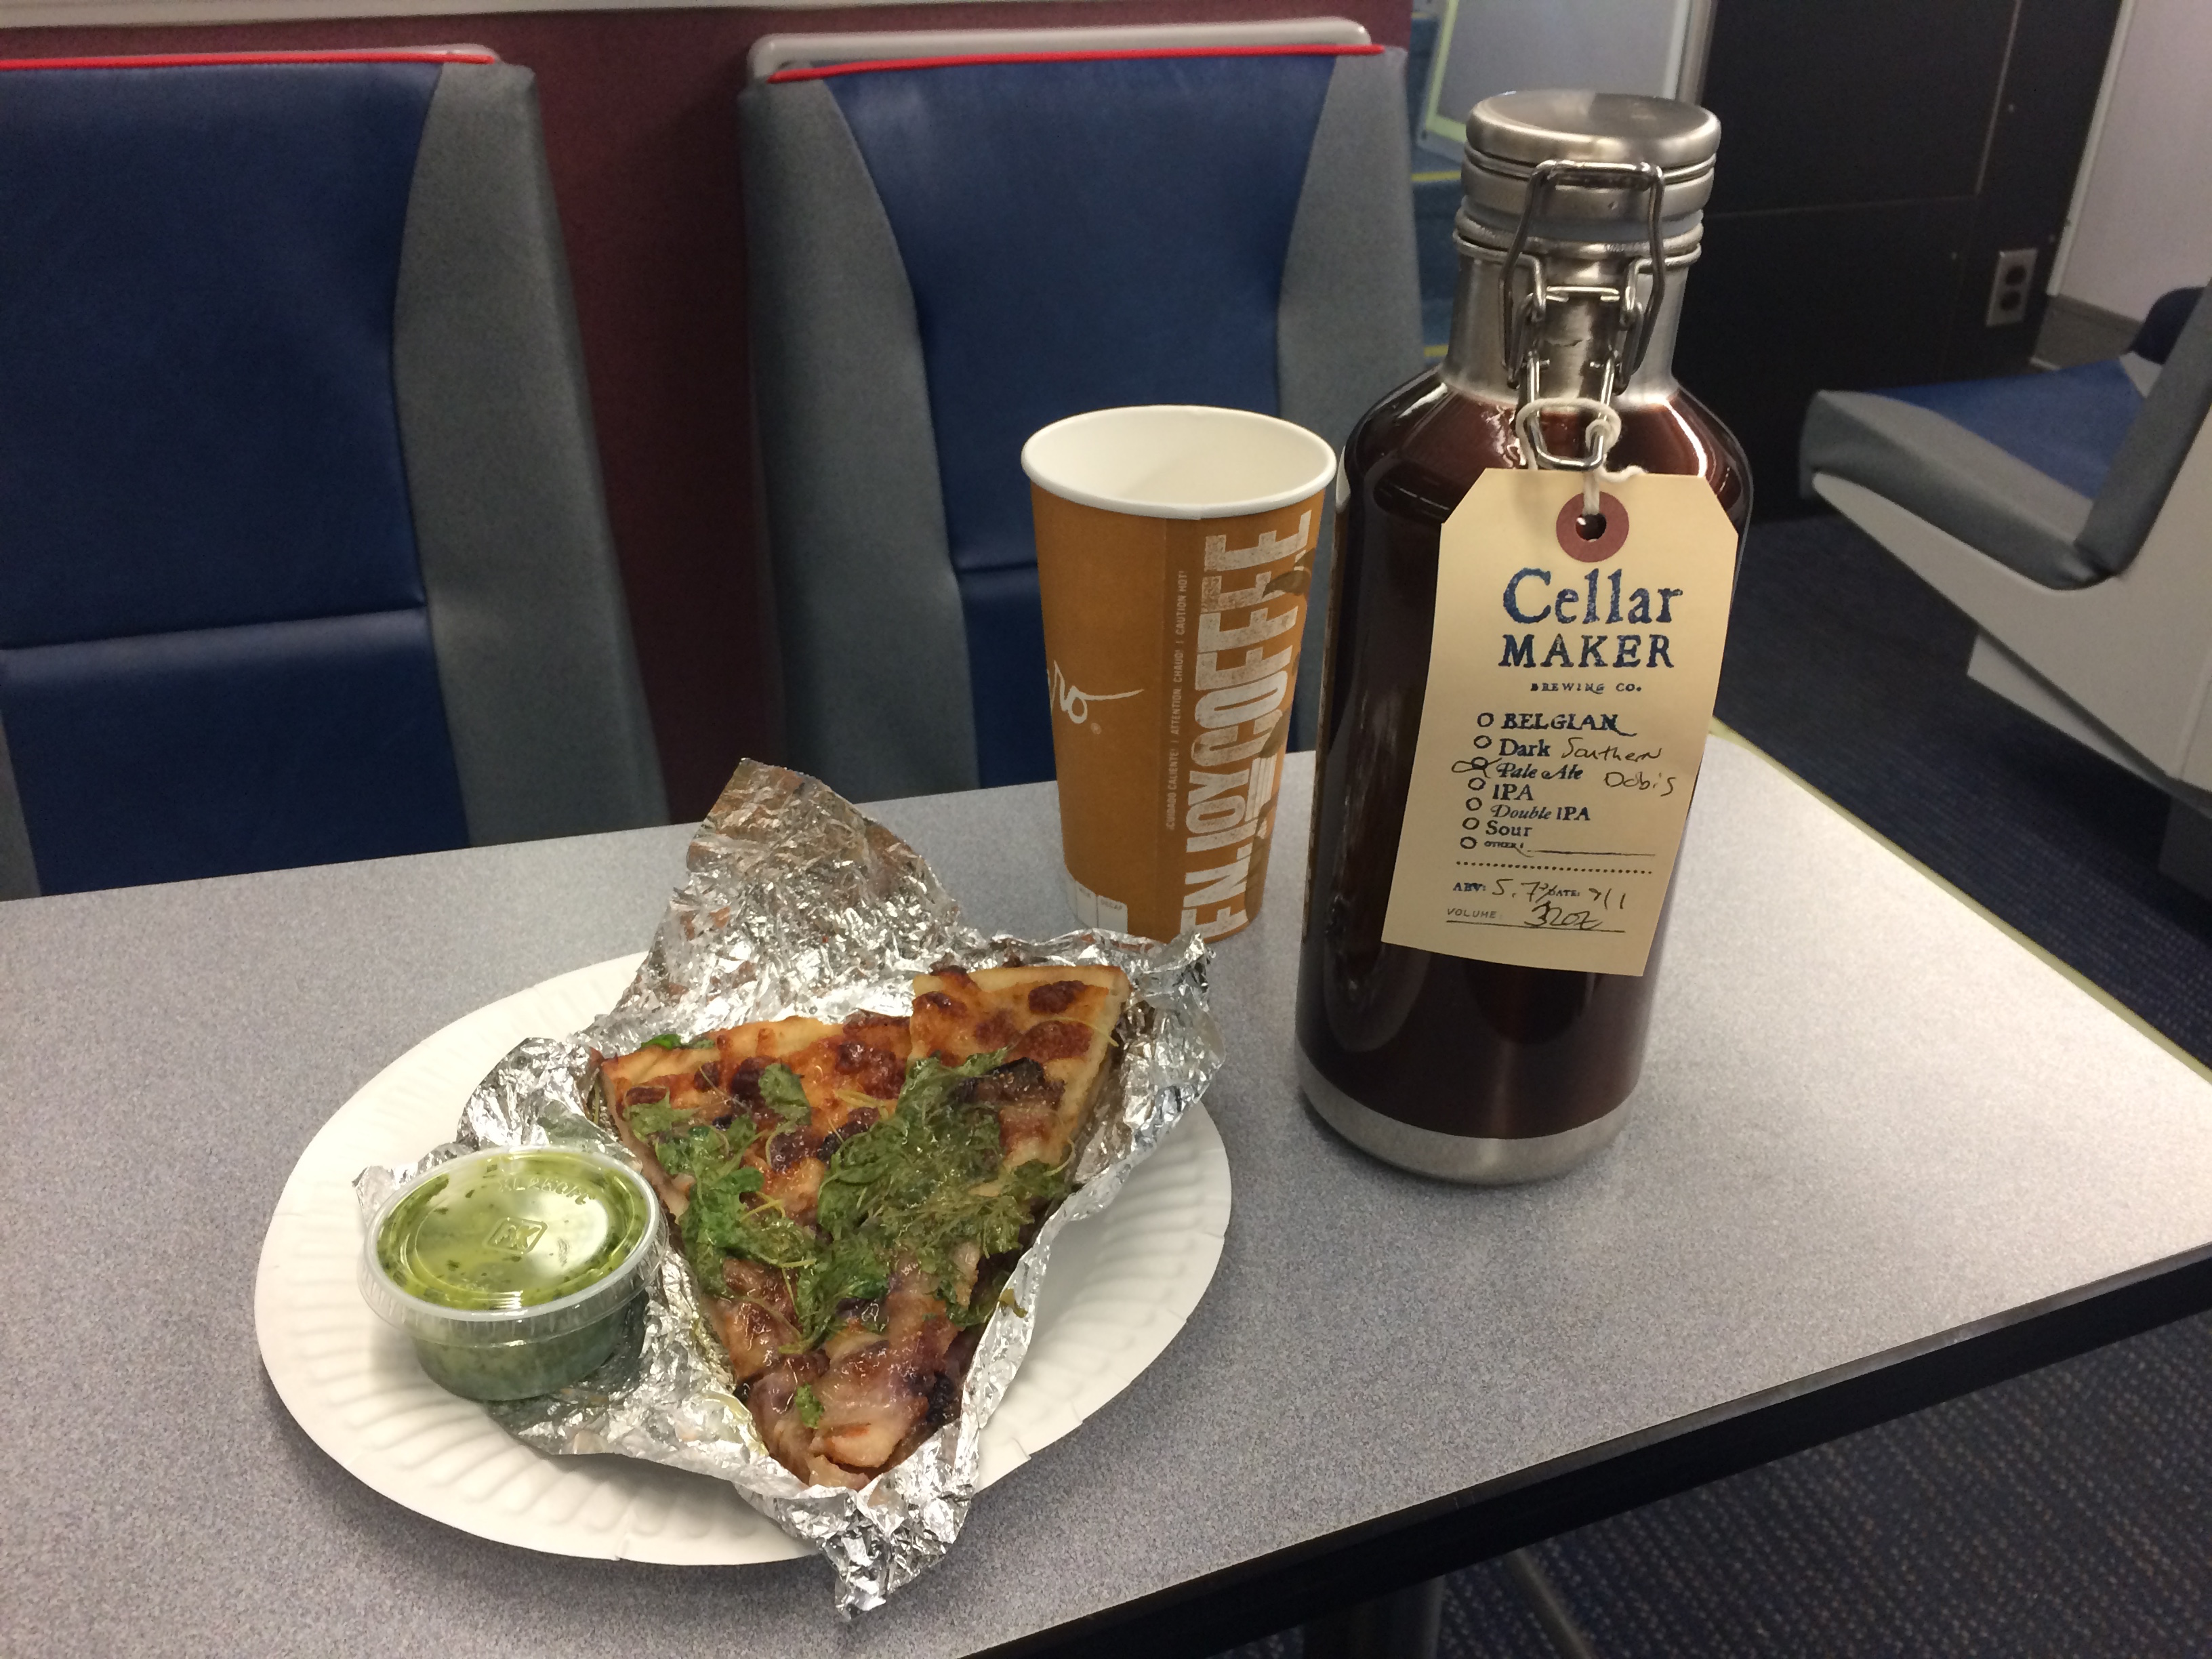 Great on the train! Now with pizza!